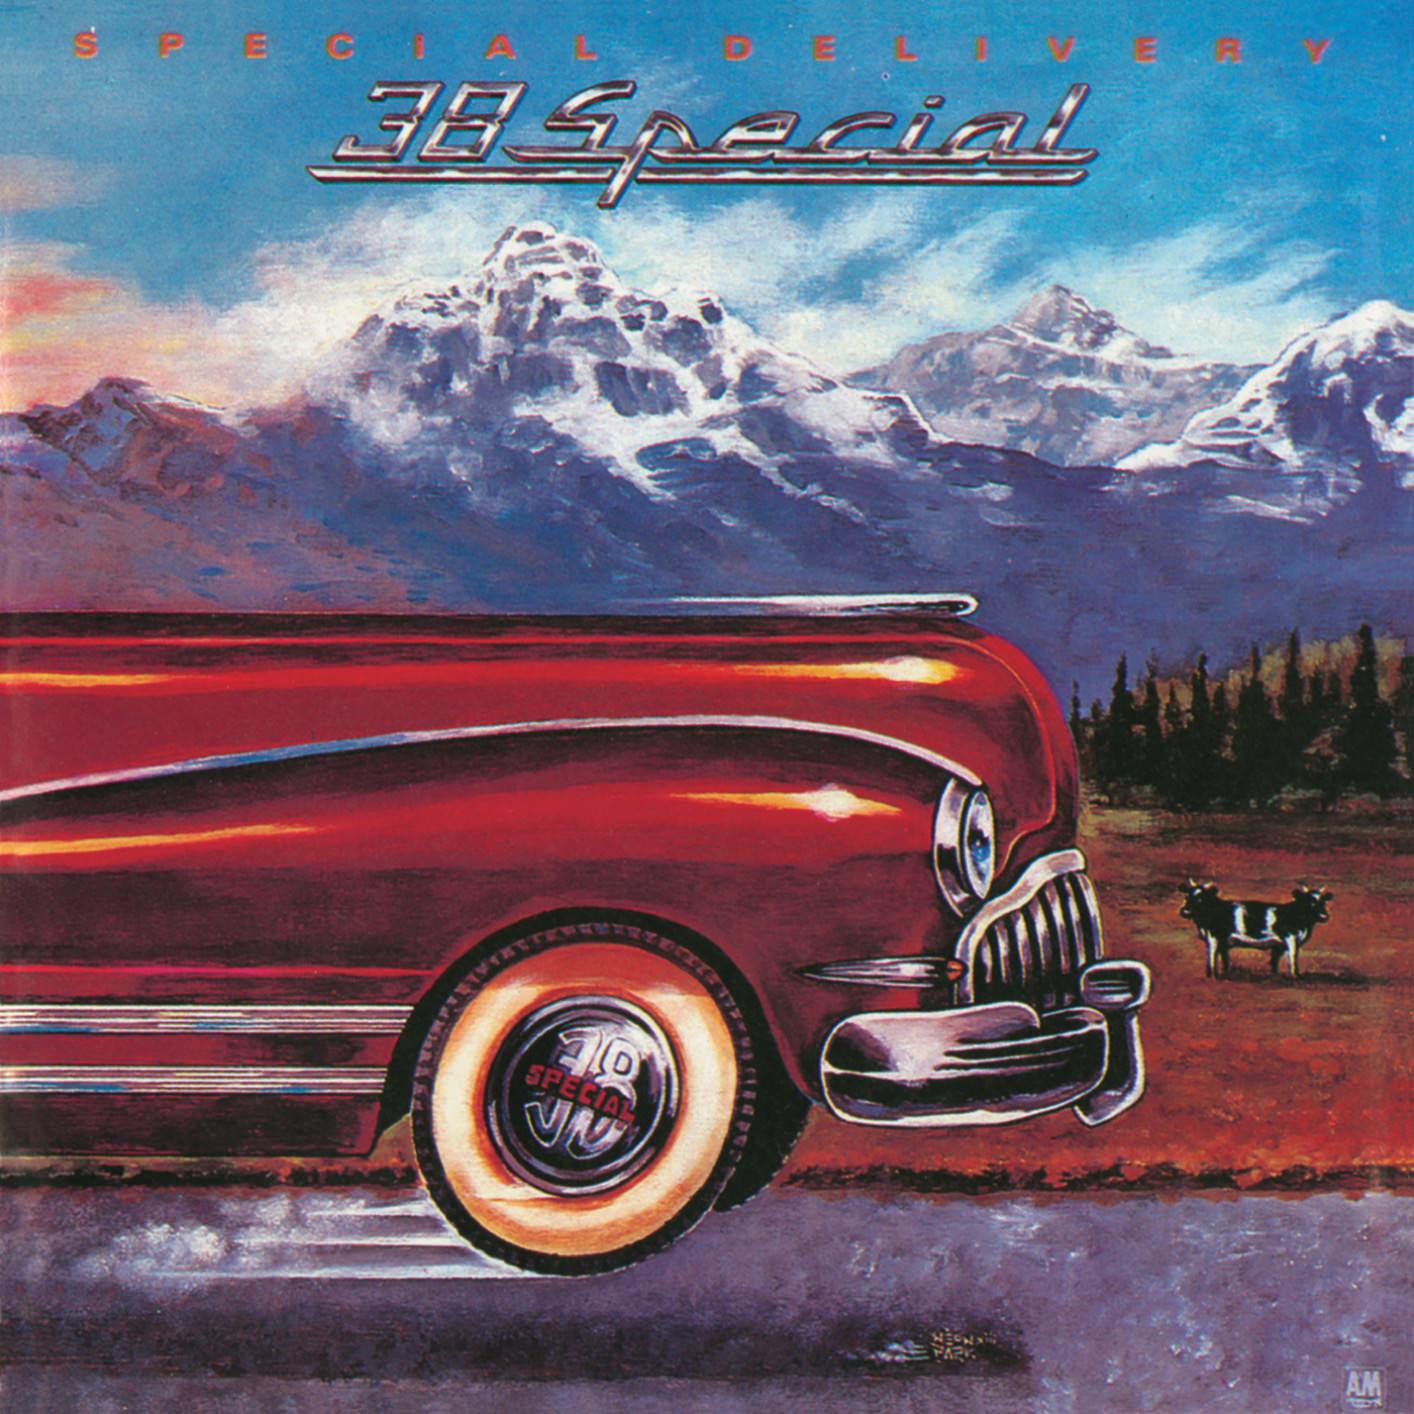 38 Special - Special Delivery (1978/2018) [FLAC 24bit/96kHz]